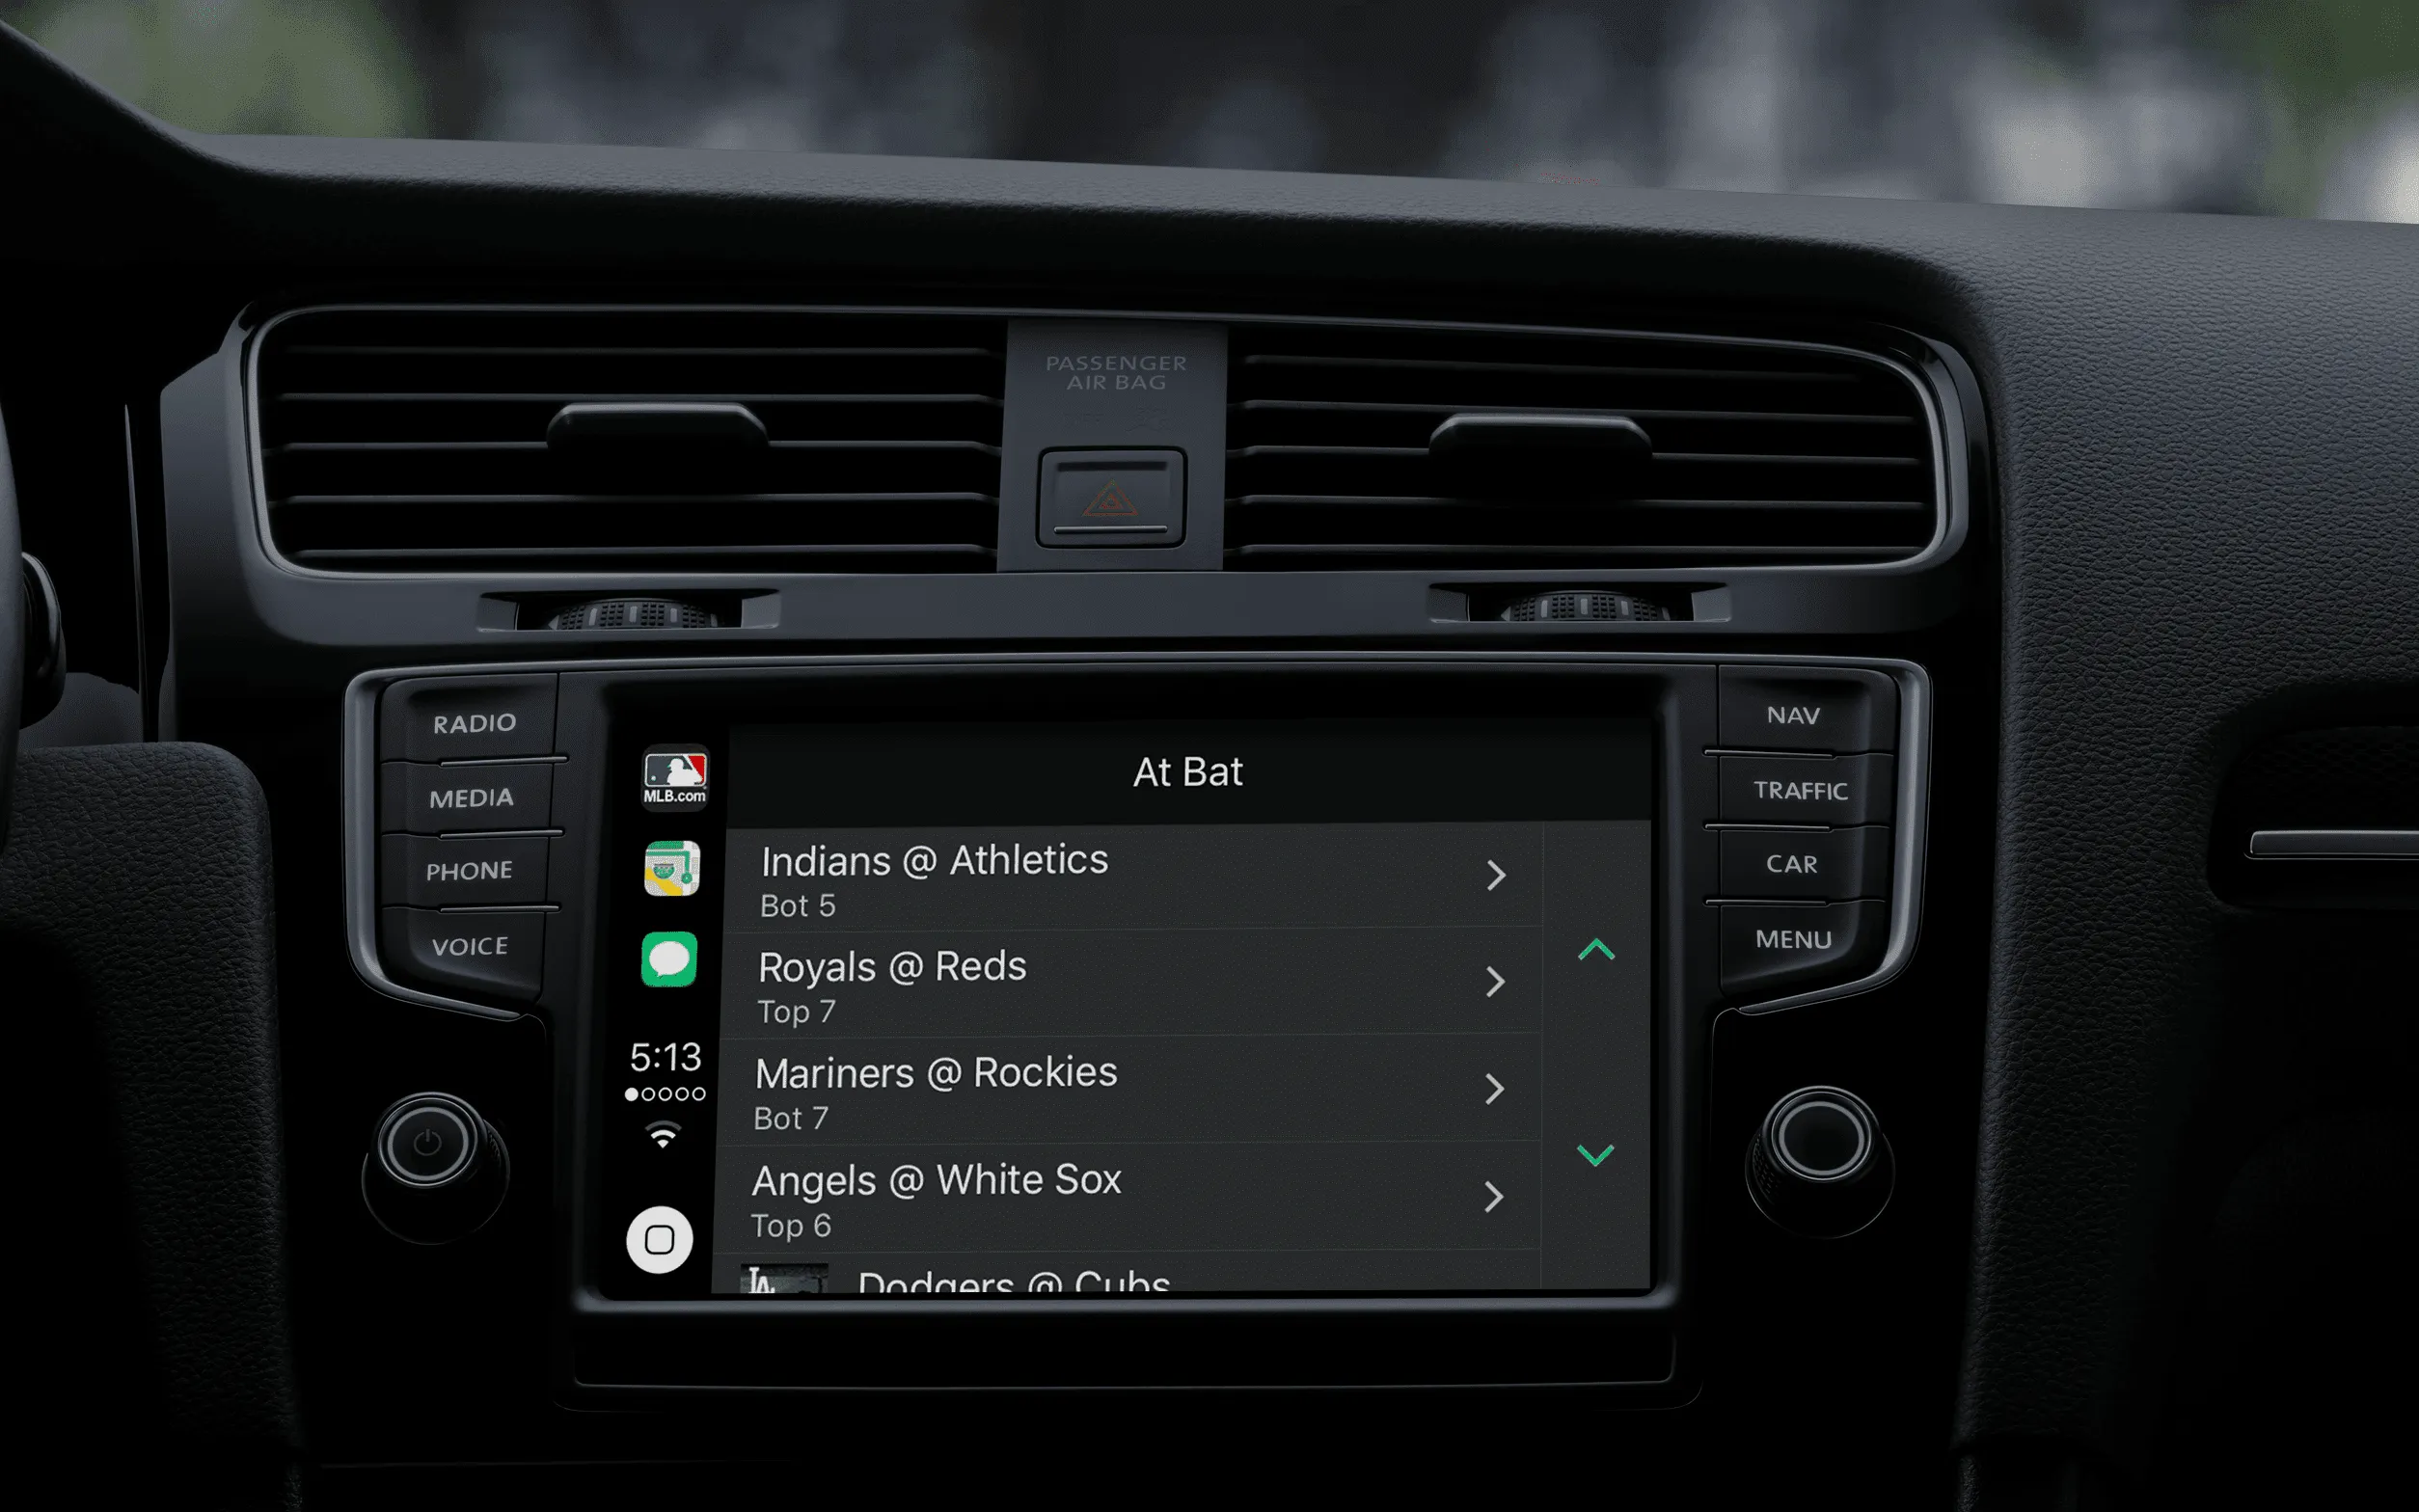 Apps supported by apple CarPlay: MLB At Bat